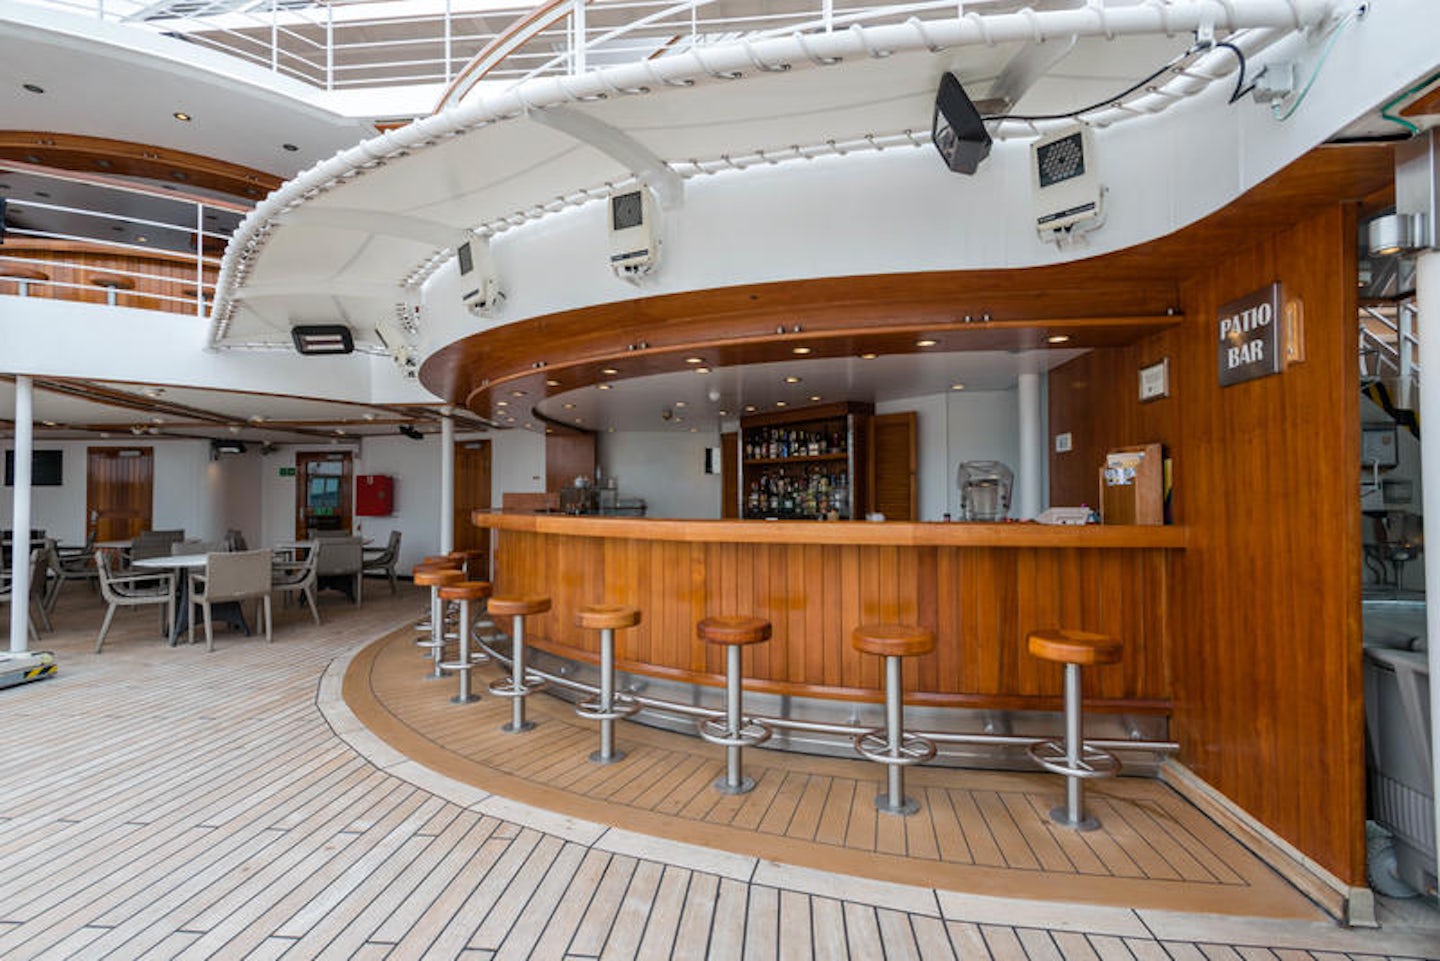 Patio Bar on Seabourn Quest